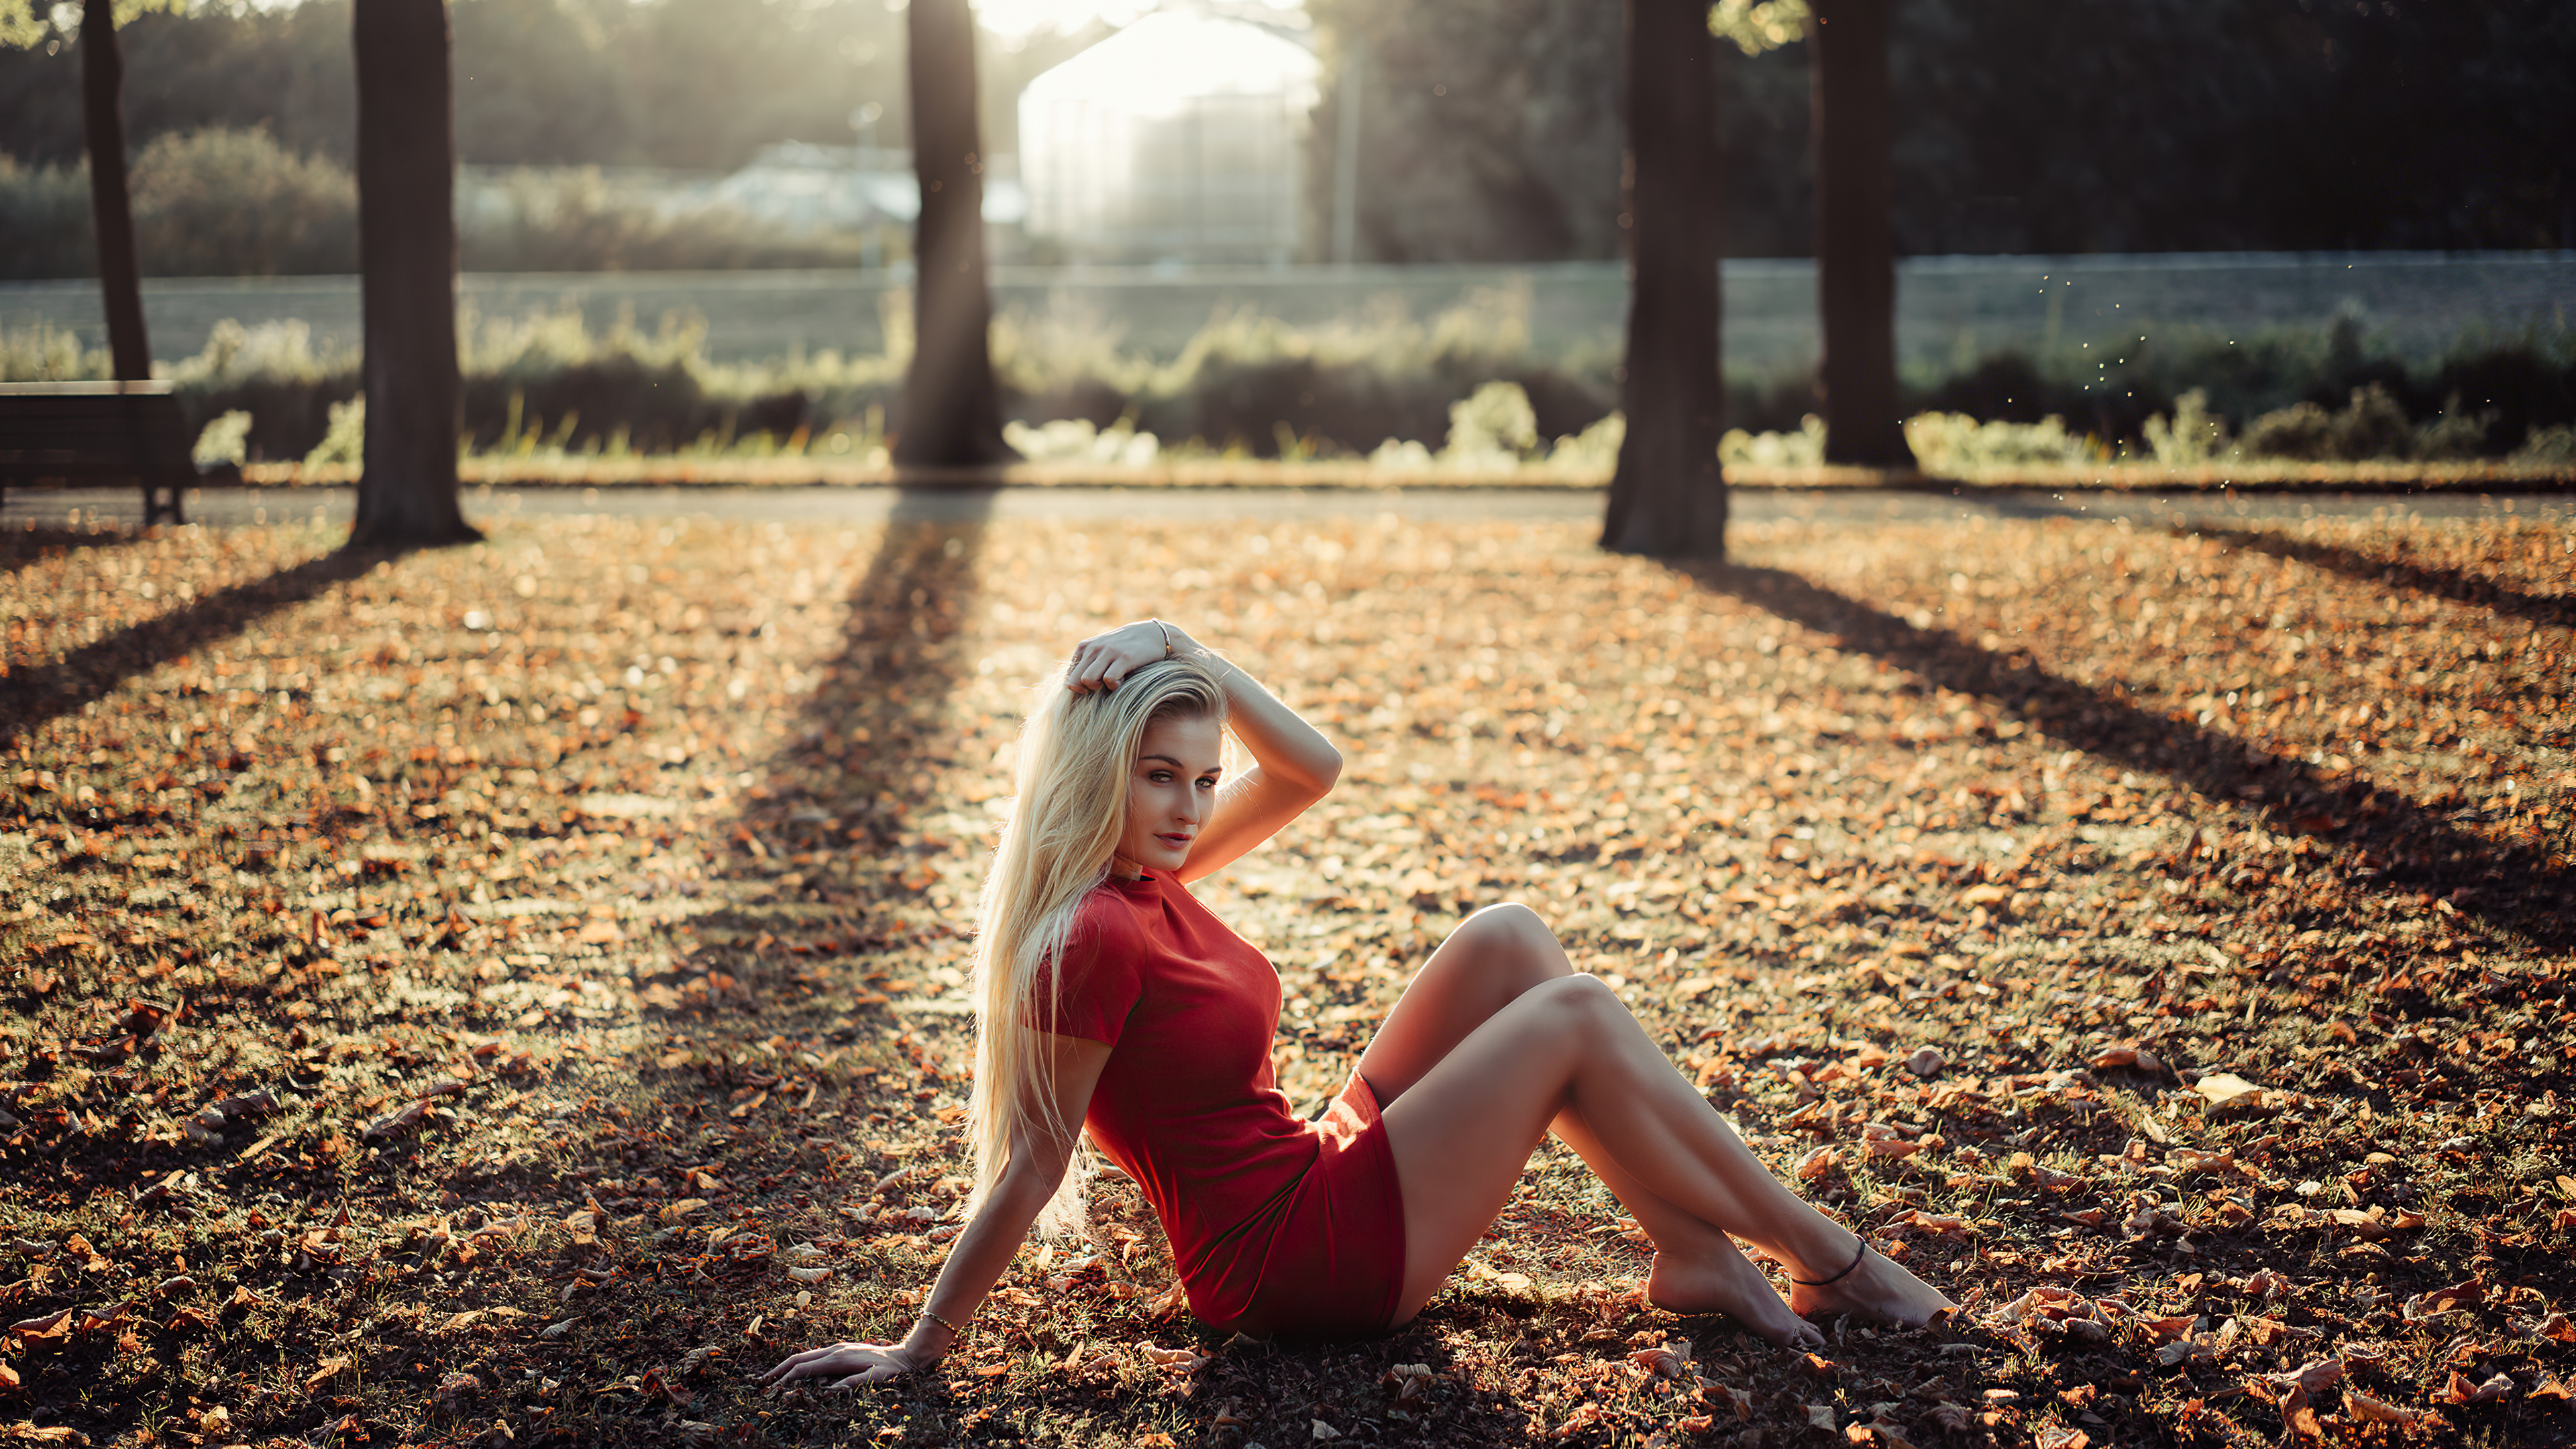 A girl in a red dress in the morning at sunrise